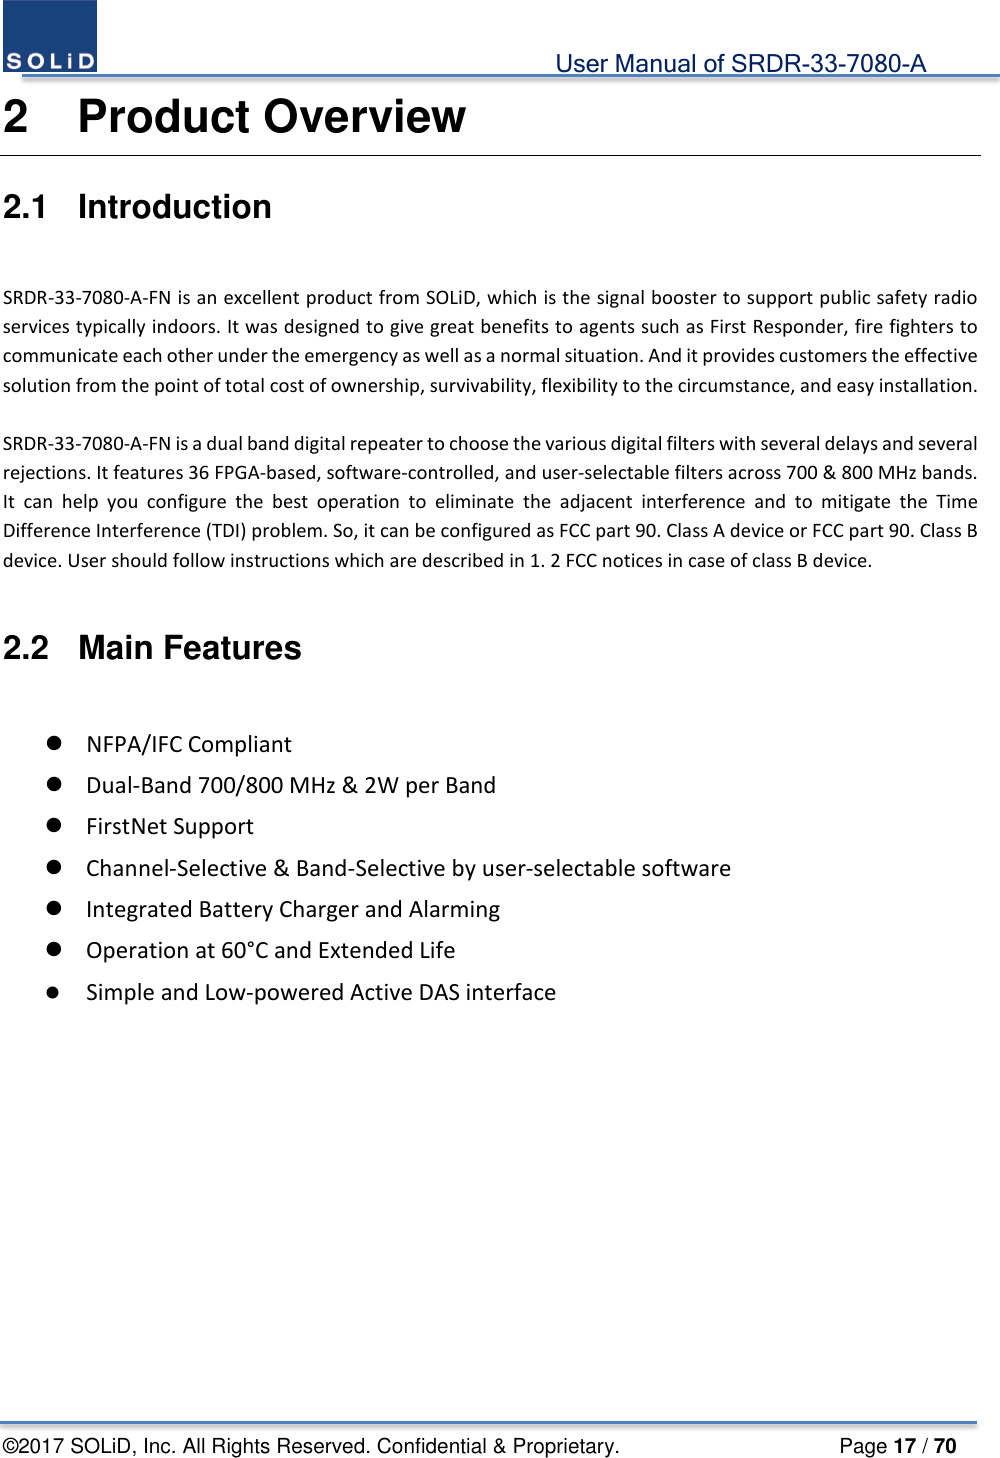                                             User Manual of SRDR-33-7080-A ©2017 SOLiD, Inc. All Rights Reserved. Confidential &amp; Proprietary.                     Page 17 / 70 2  Product Overview 2.1  Introduction  SRDR-33-7080-A-FN is an excellent product from SOLiD, which is the signal booster to support public safety radio services typically indoors. It was designed to give great benefits to agents such as First Responder, fire fighters to communicate each other under the emergency as well as a normal situation. And it provides customers the effective solution from the point of total cost of ownership, survivability, flexibility to the circumstance, and easy installation.  SRDR-33-7080-A-FN is a dual band digital repeater to choose the various digital filters with several delays and several rejections. It features 36 FPGA-based, software-controlled, and user-selectable filters across 700 &amp; 800 MHz bands. It can help you configure the best operation to eliminate the adjacent interference and to mitigate the Time Difference Interference (TDI) problem. So, it can be configured as FCC part 90. Class A device or FCC part 90. Class B device. User should follow instructions which are described in 1. 2 FCC notices in case of class B device.  2.2  Main Features   NFPA/IFC Compliant  Dual-Band 700/800 MHz &amp; 2W per Band  FirstNet Support  Channel-Selective &amp; Band-Selective by user-selectable software  Integrated Battery Charger and Alarming  Operation at 60°C and Extended Life  Simple and Low-powered Active DAS interface    